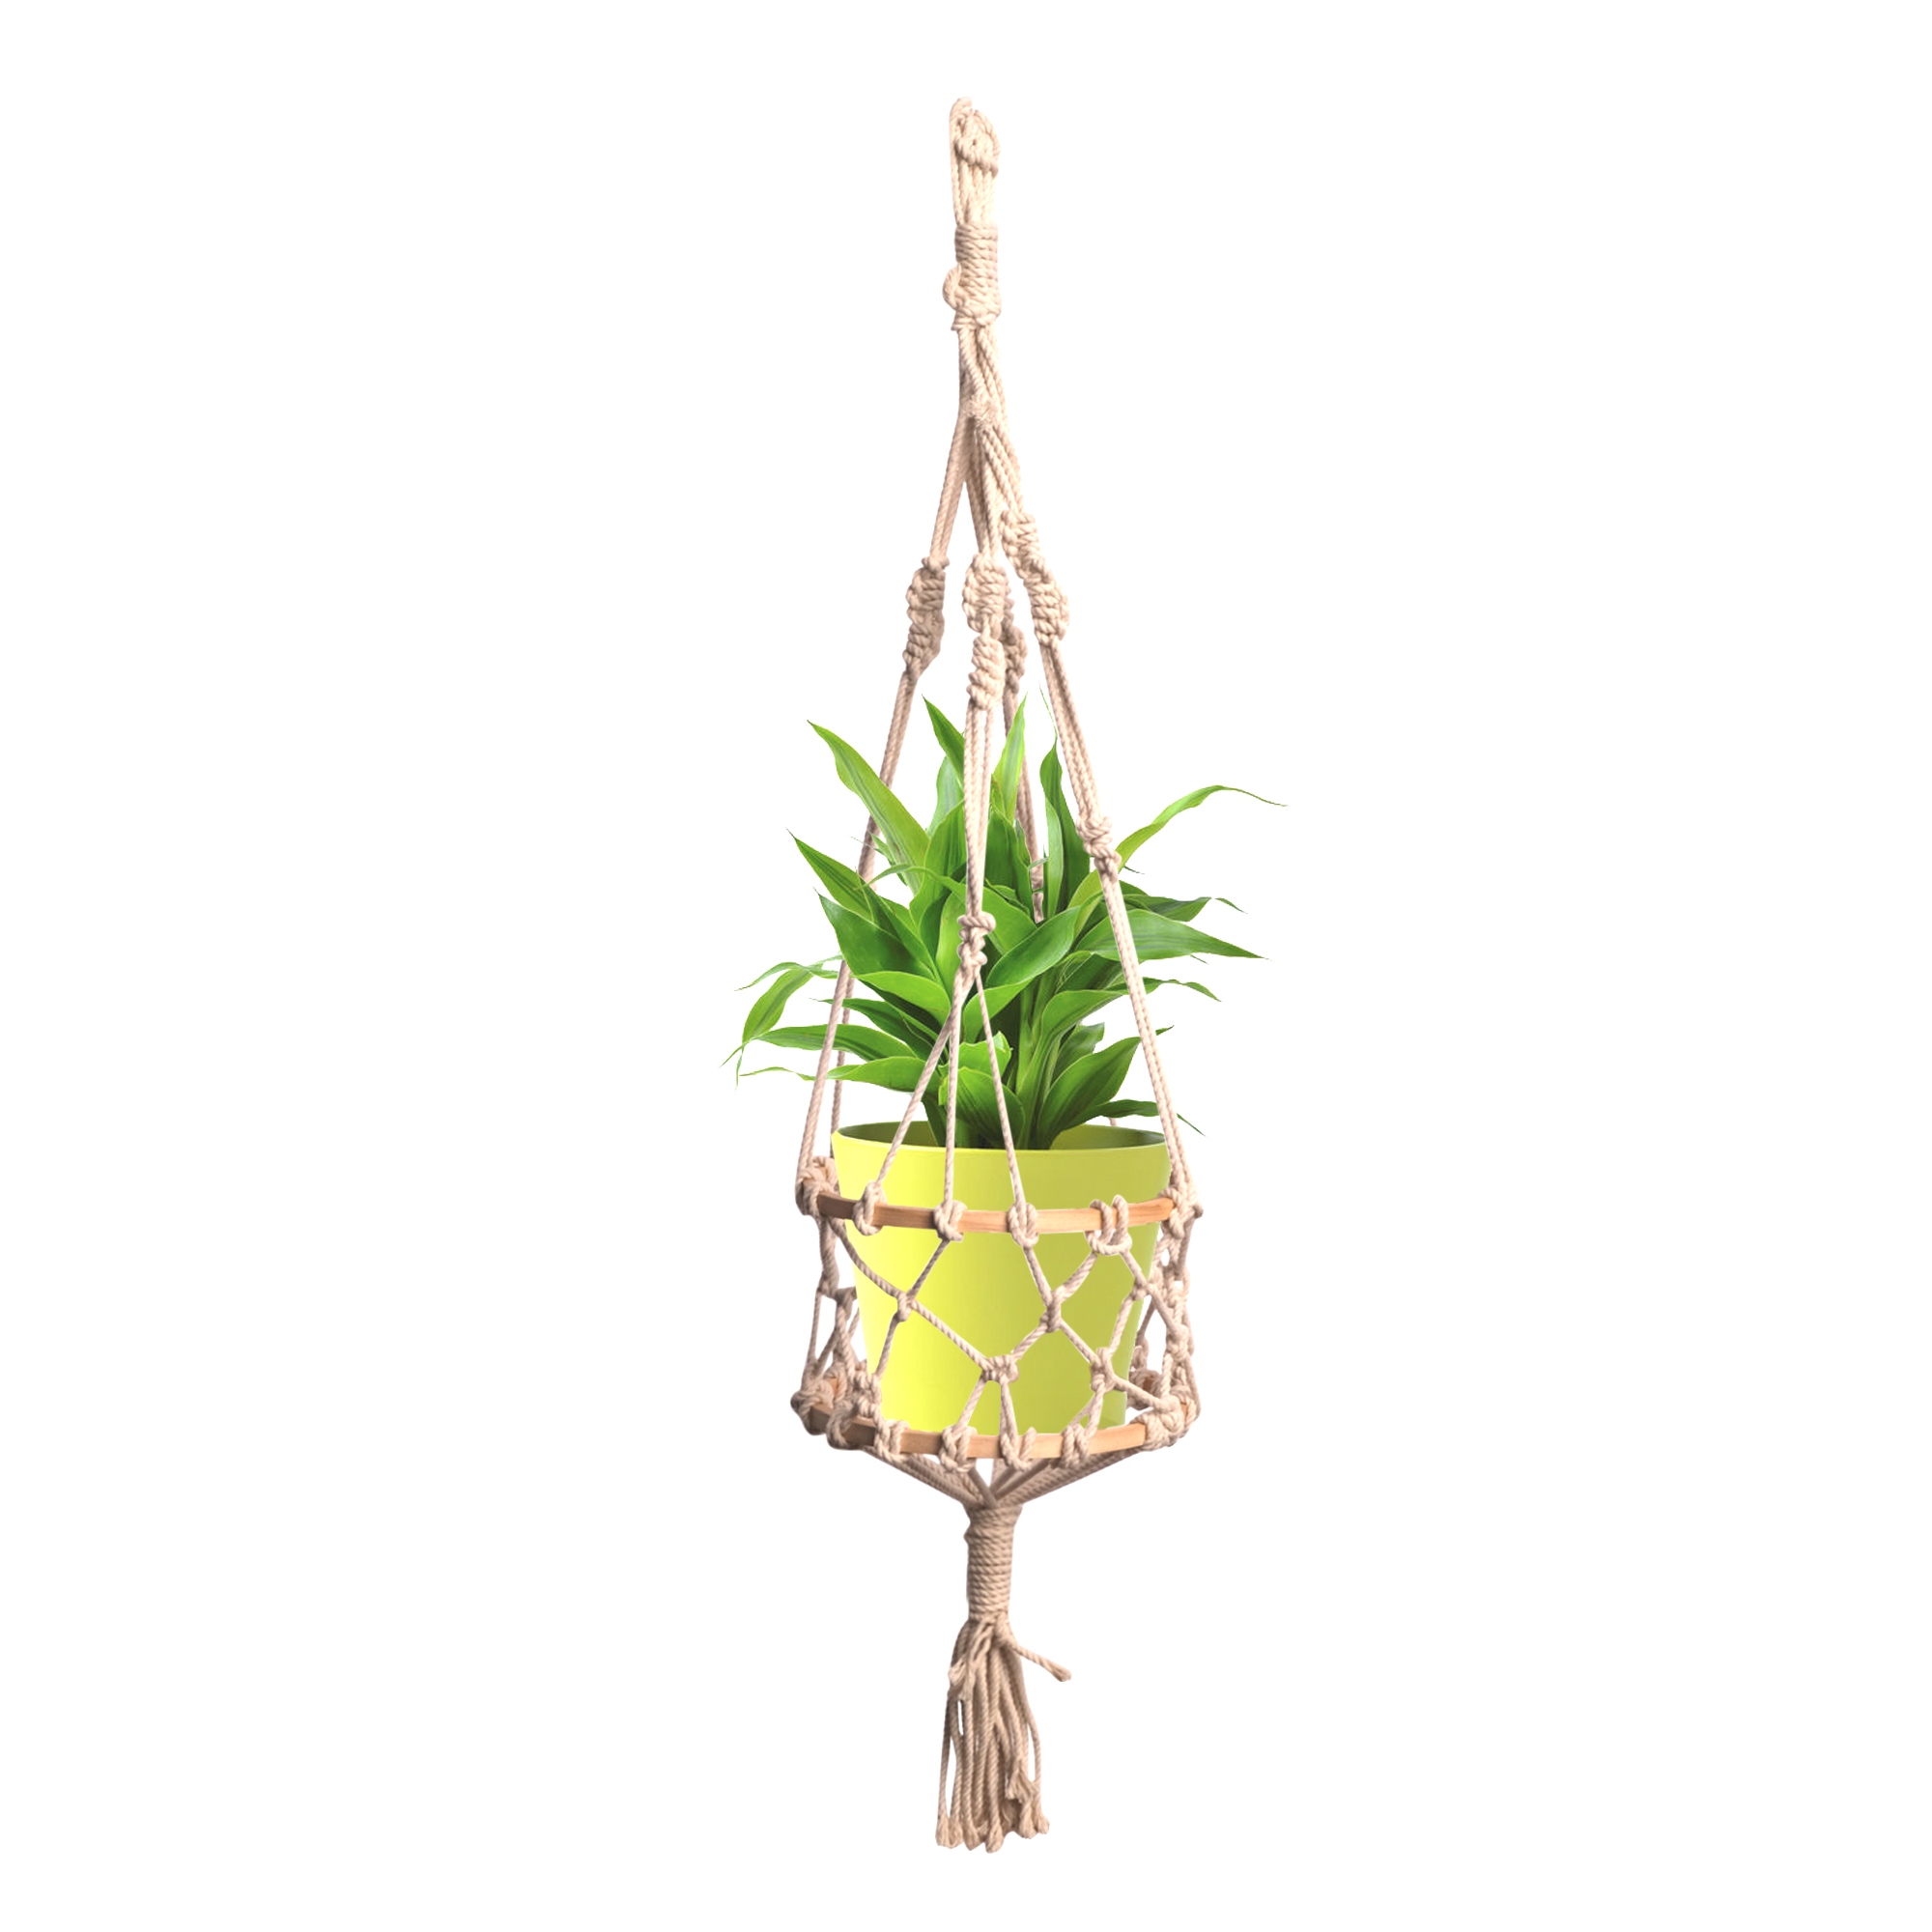 Product: Upcycled Embroidery Frame As Cotton Macrame Planter